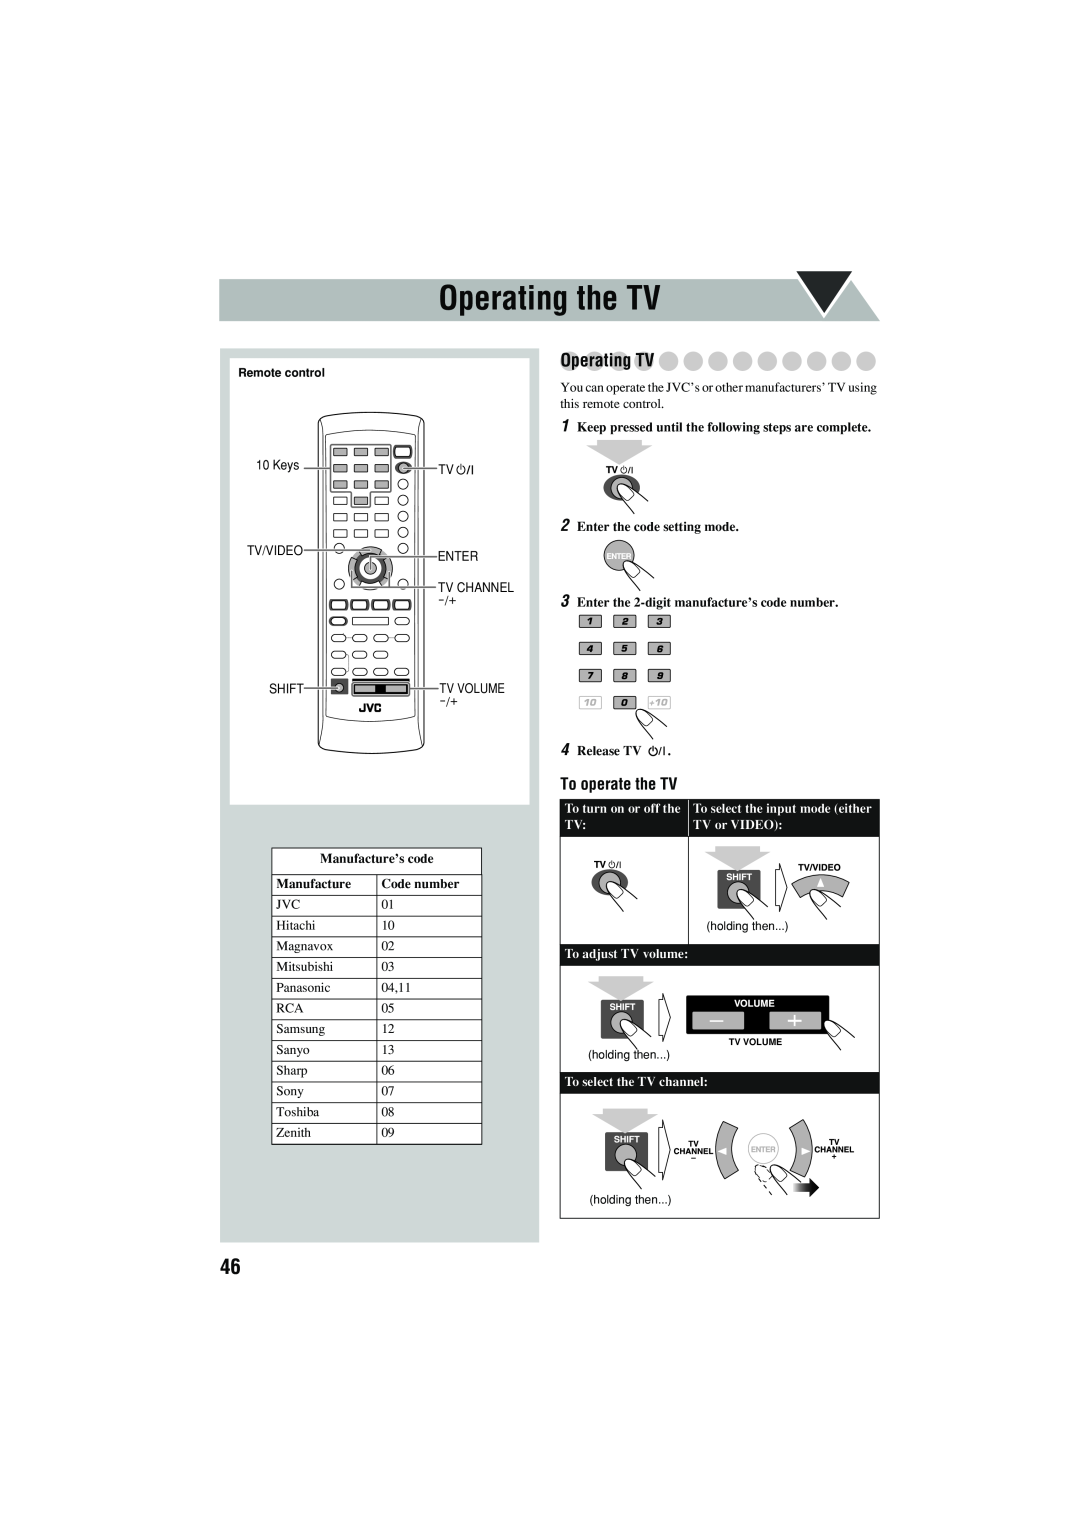 JVC CA-MXJD5 manual Operating the TV, Operating TV, To operate the TV, Manufacture’s code, Code number 